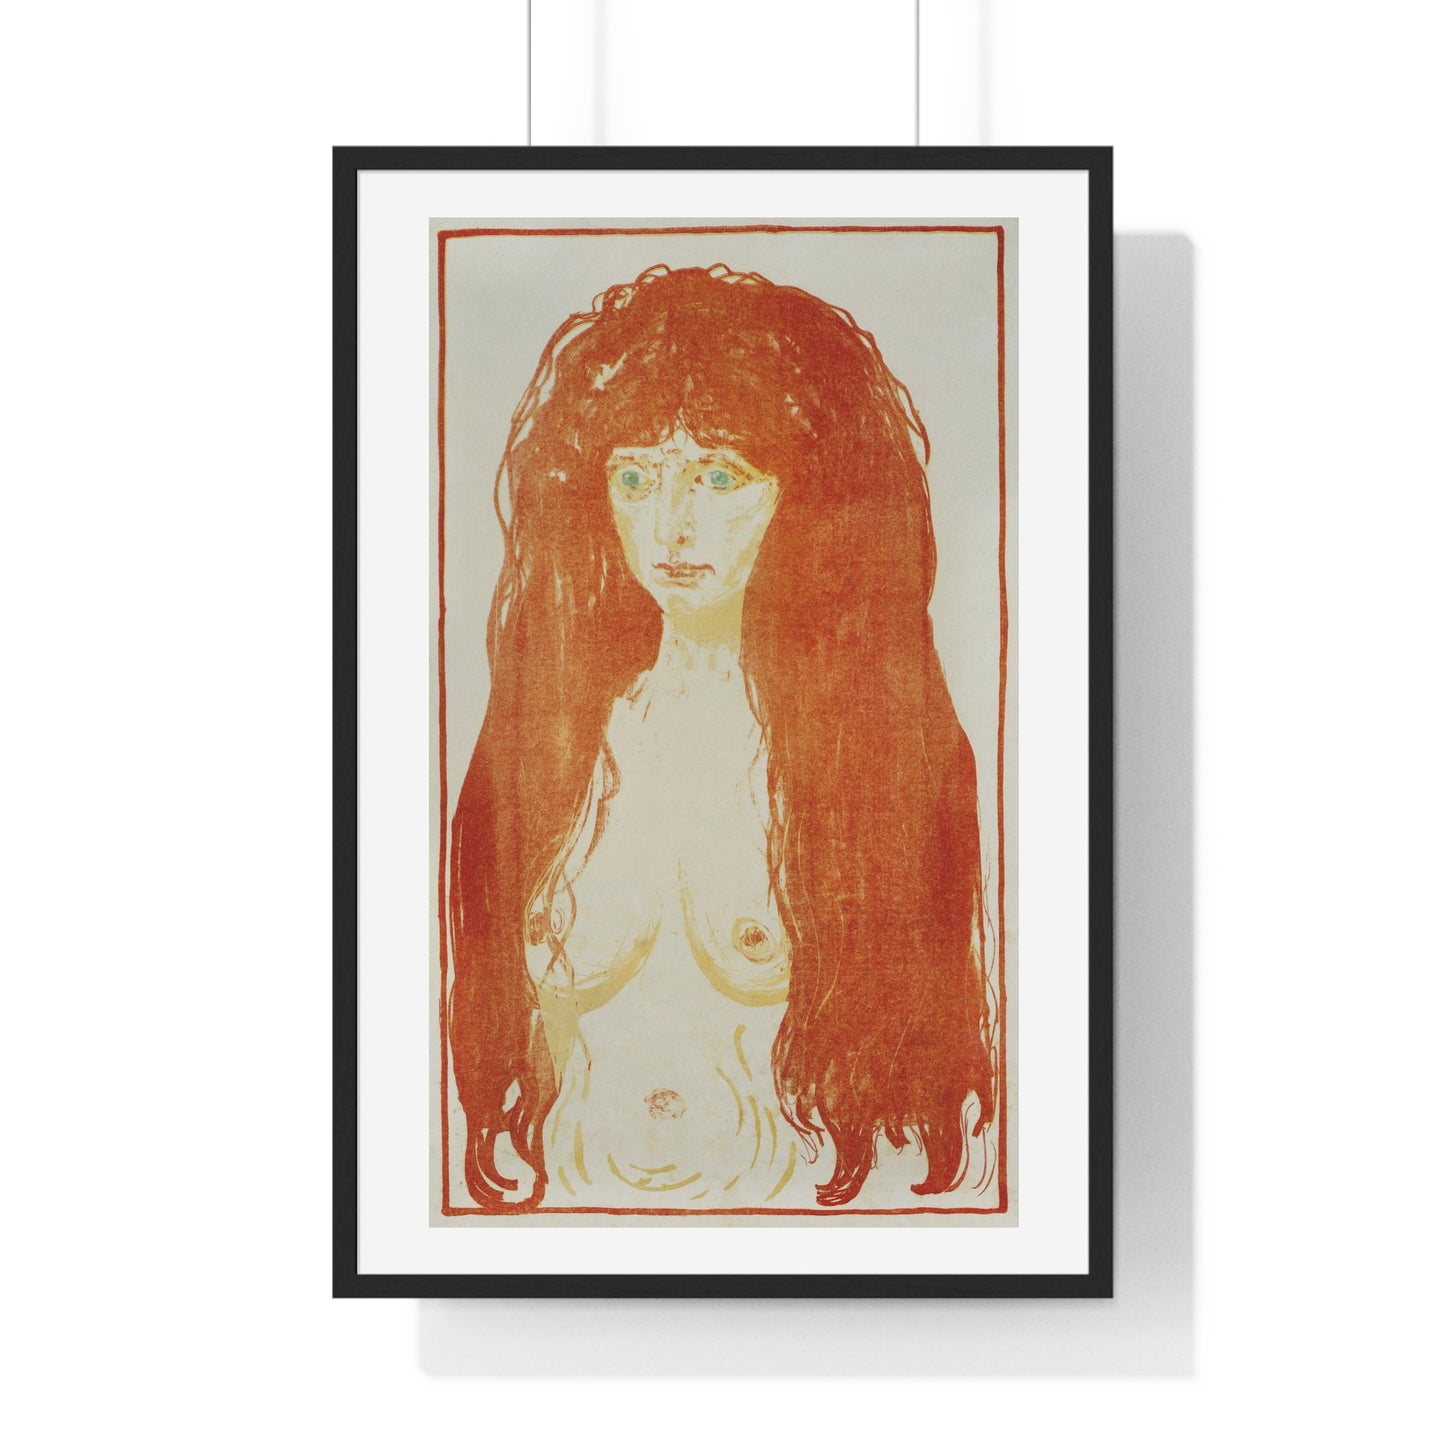 The Sin (Woman with Red Hair and Green Eyes) by Edvard Munch (1902) from the Original, Framed Art Print